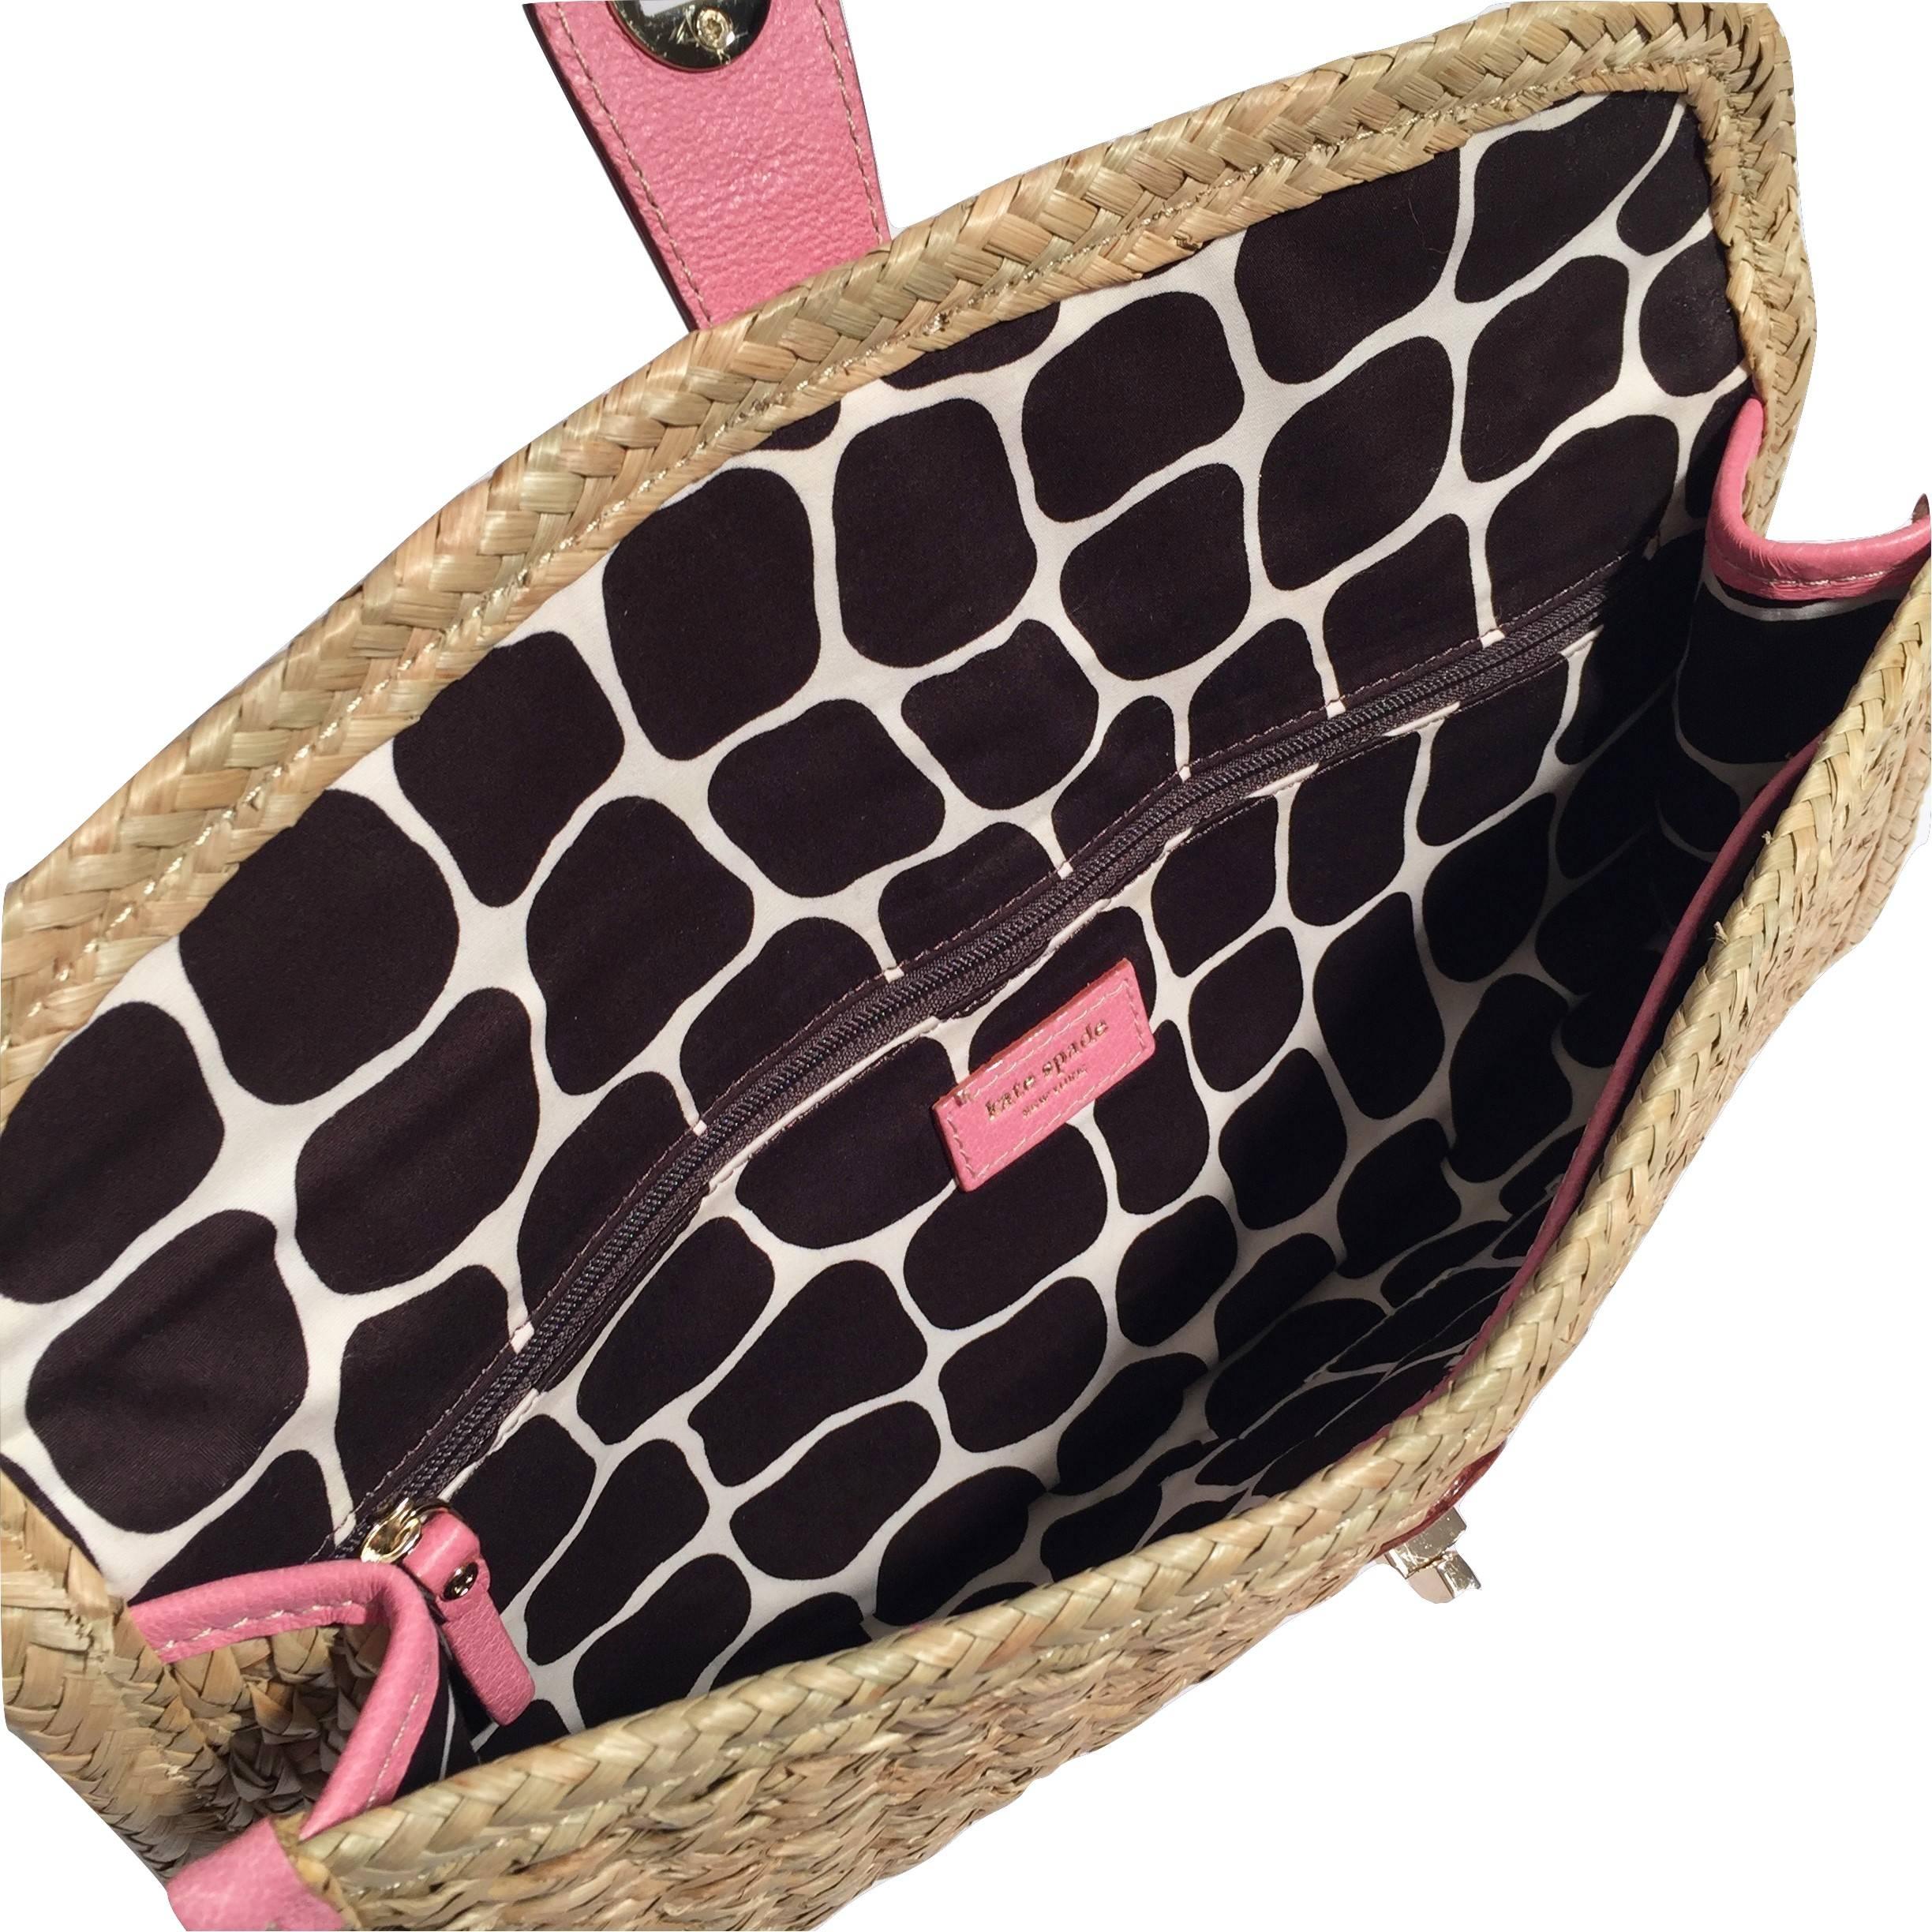 New Spring 2005 Collection Kate Spade Wicker Straw Rattan Clutch Bag  9